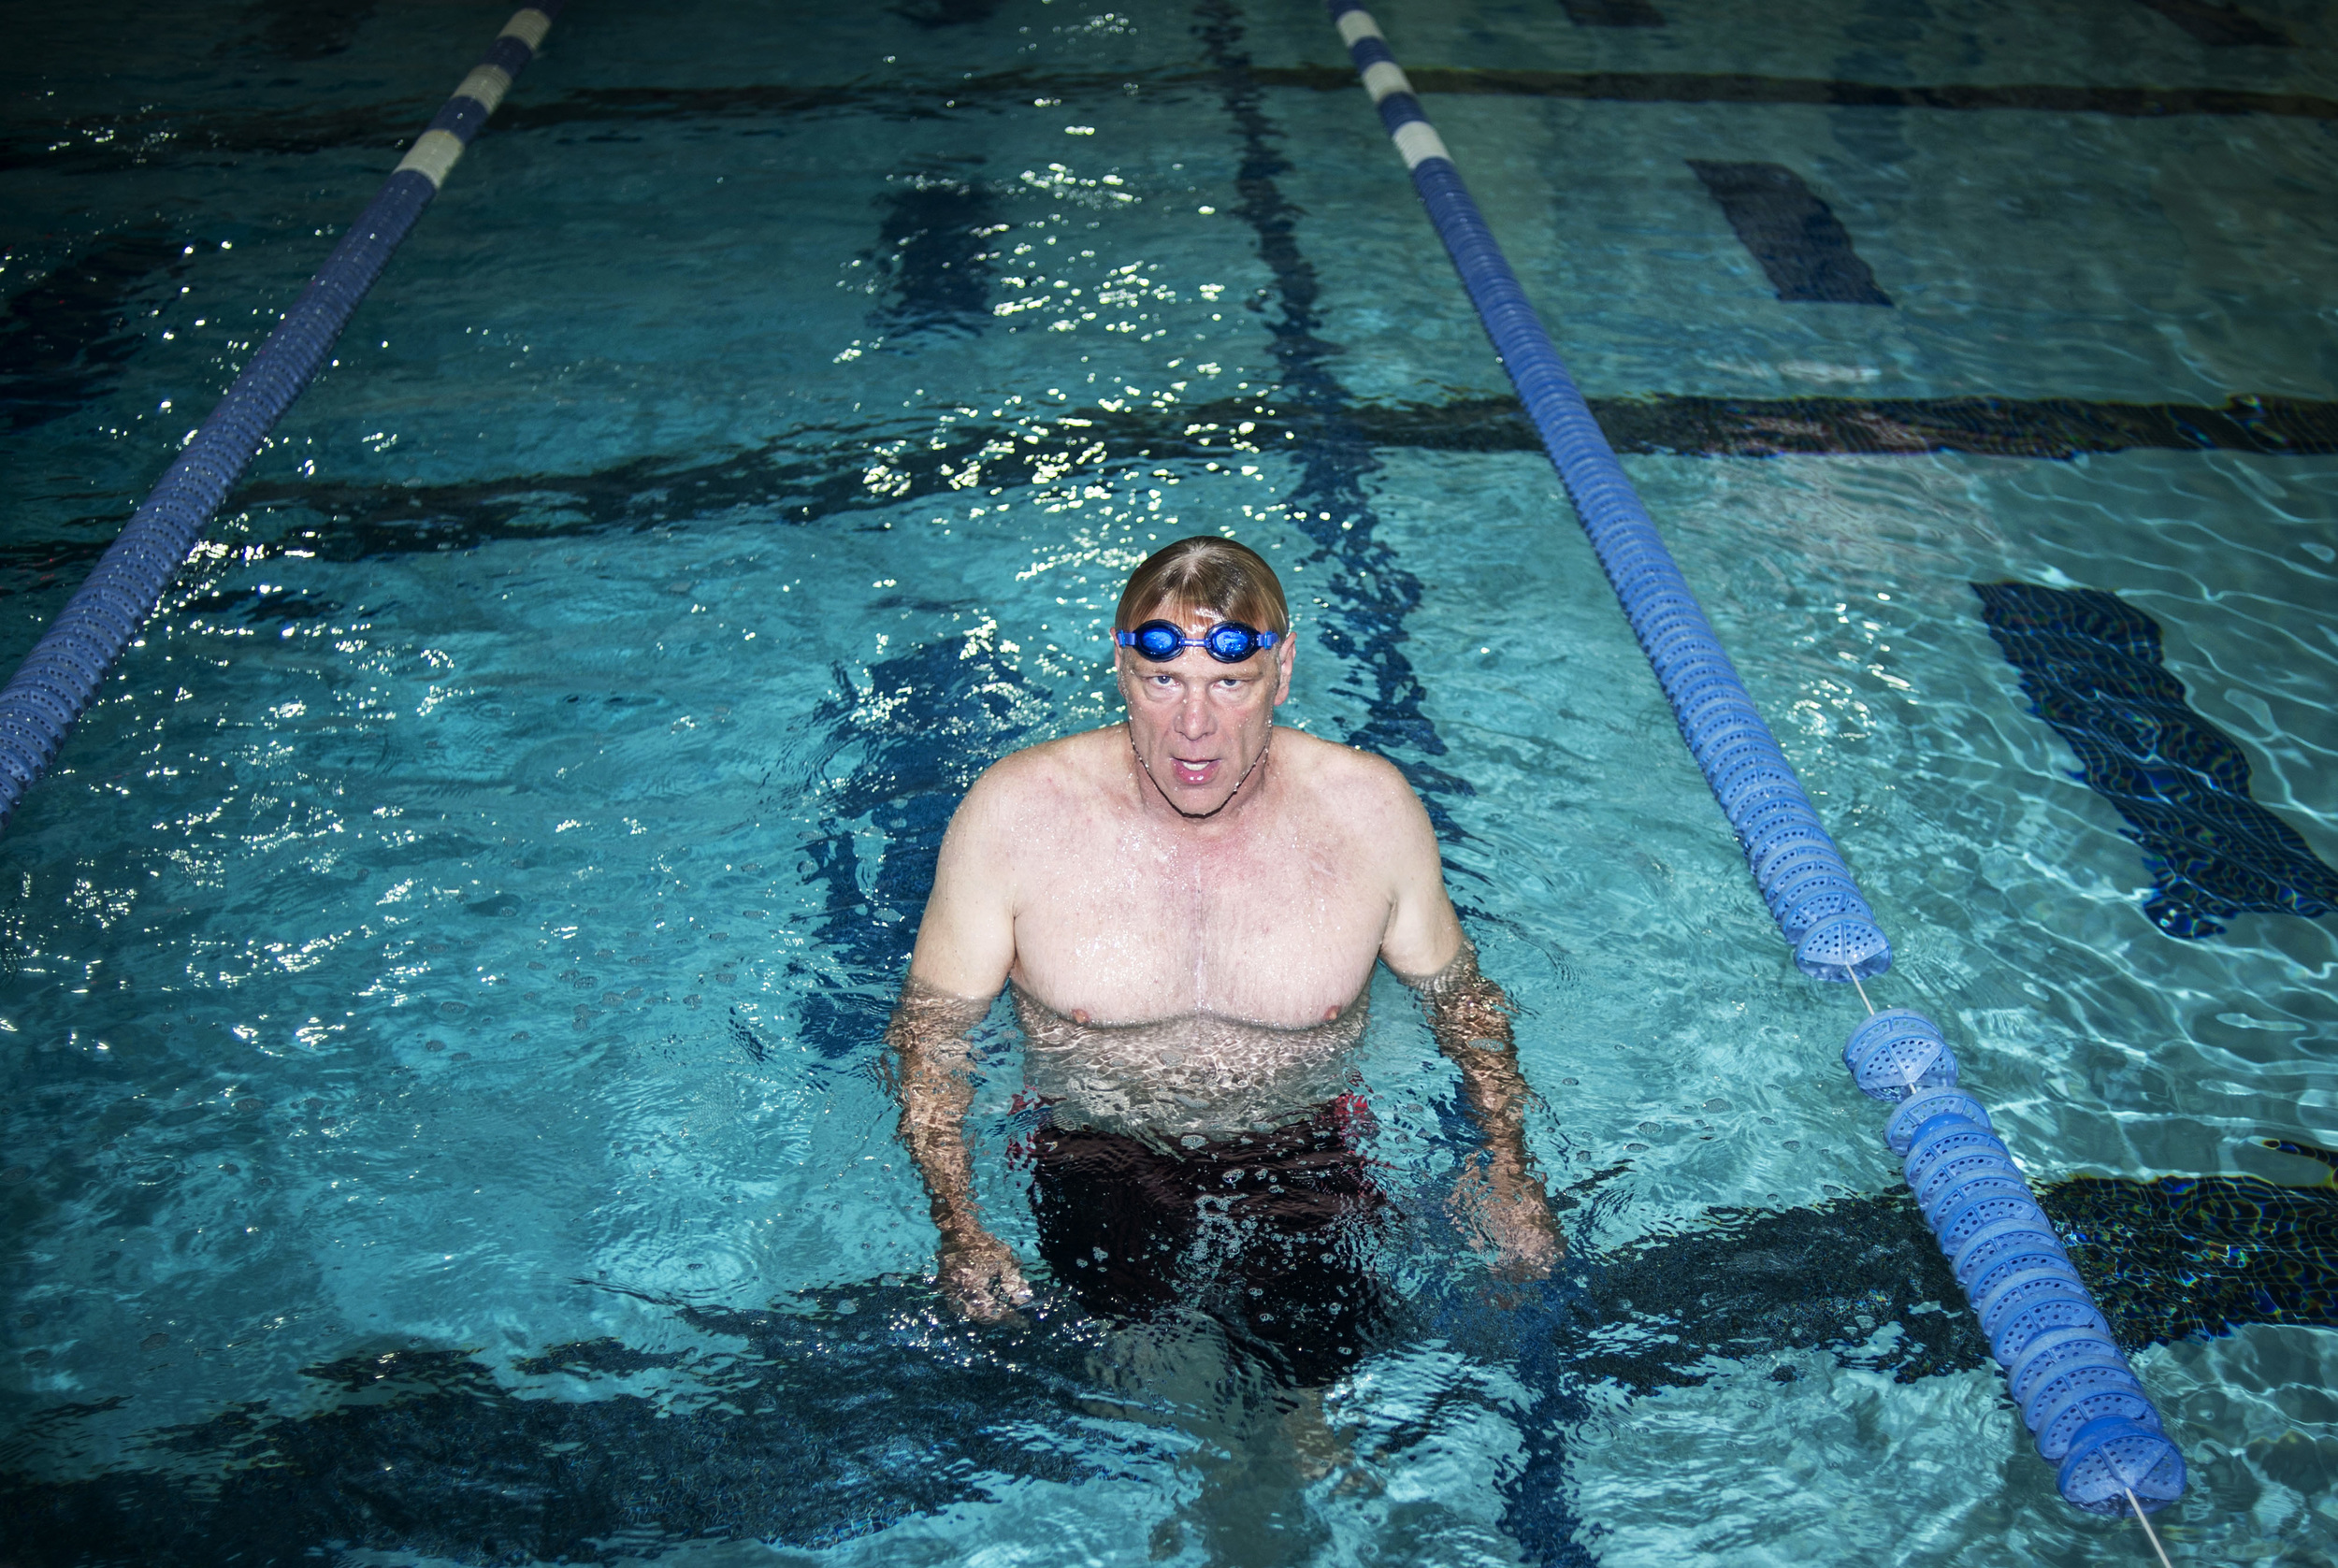  Holland resident Fred Nelis, 61-years-old, will be competing in the Transplant Games, an Olympic-style competition for post-transplant patients in Cleveland, Ohio, with a 32-year-old heart. "This is the first time I'm going to race with the two of u